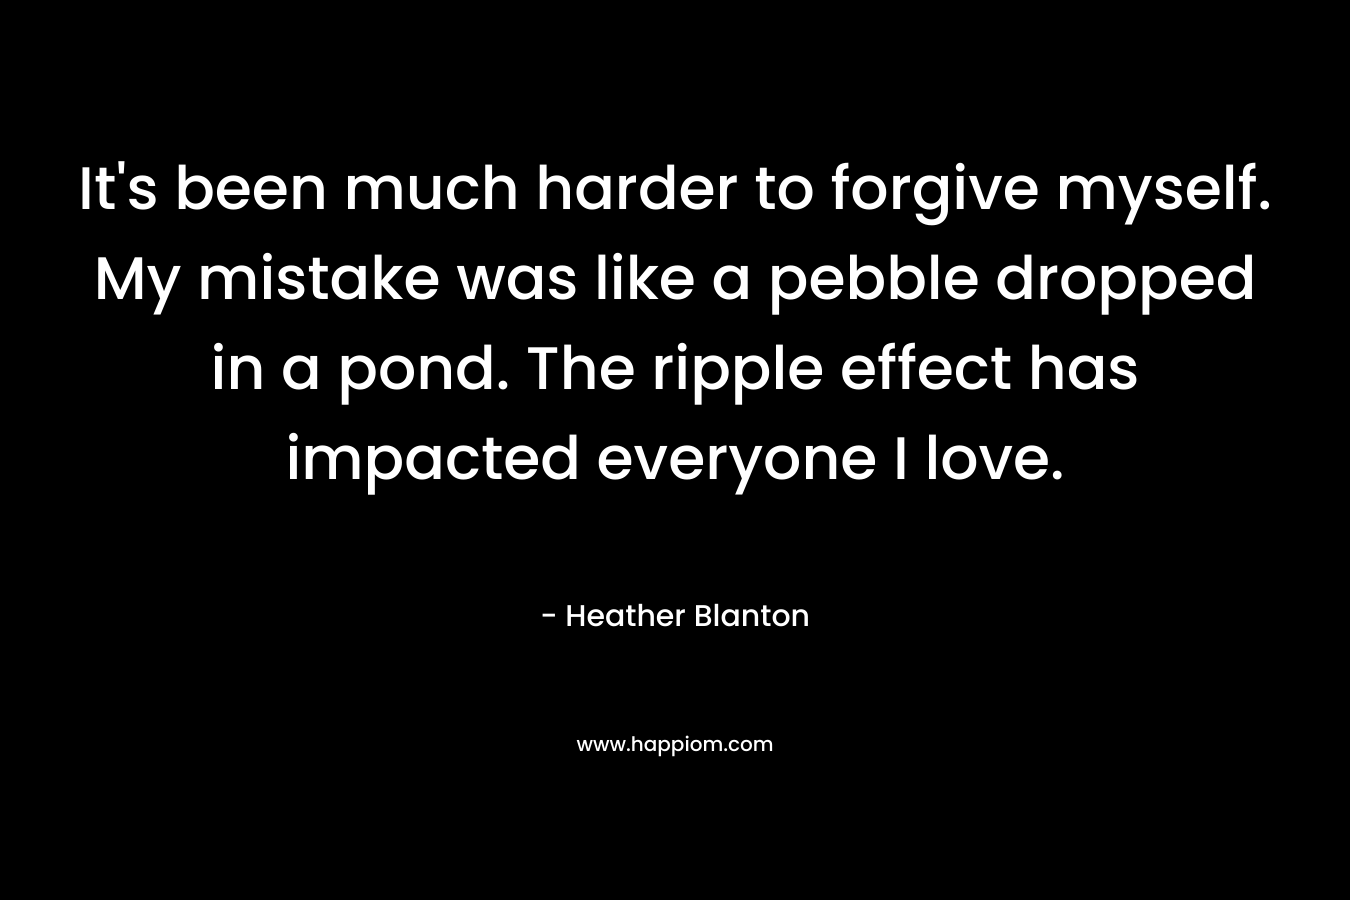 It’s been much harder to forgive myself. My mistake was like a pebble dropped in a pond. The ripple effect has impacted everyone I love. – Heather Blanton